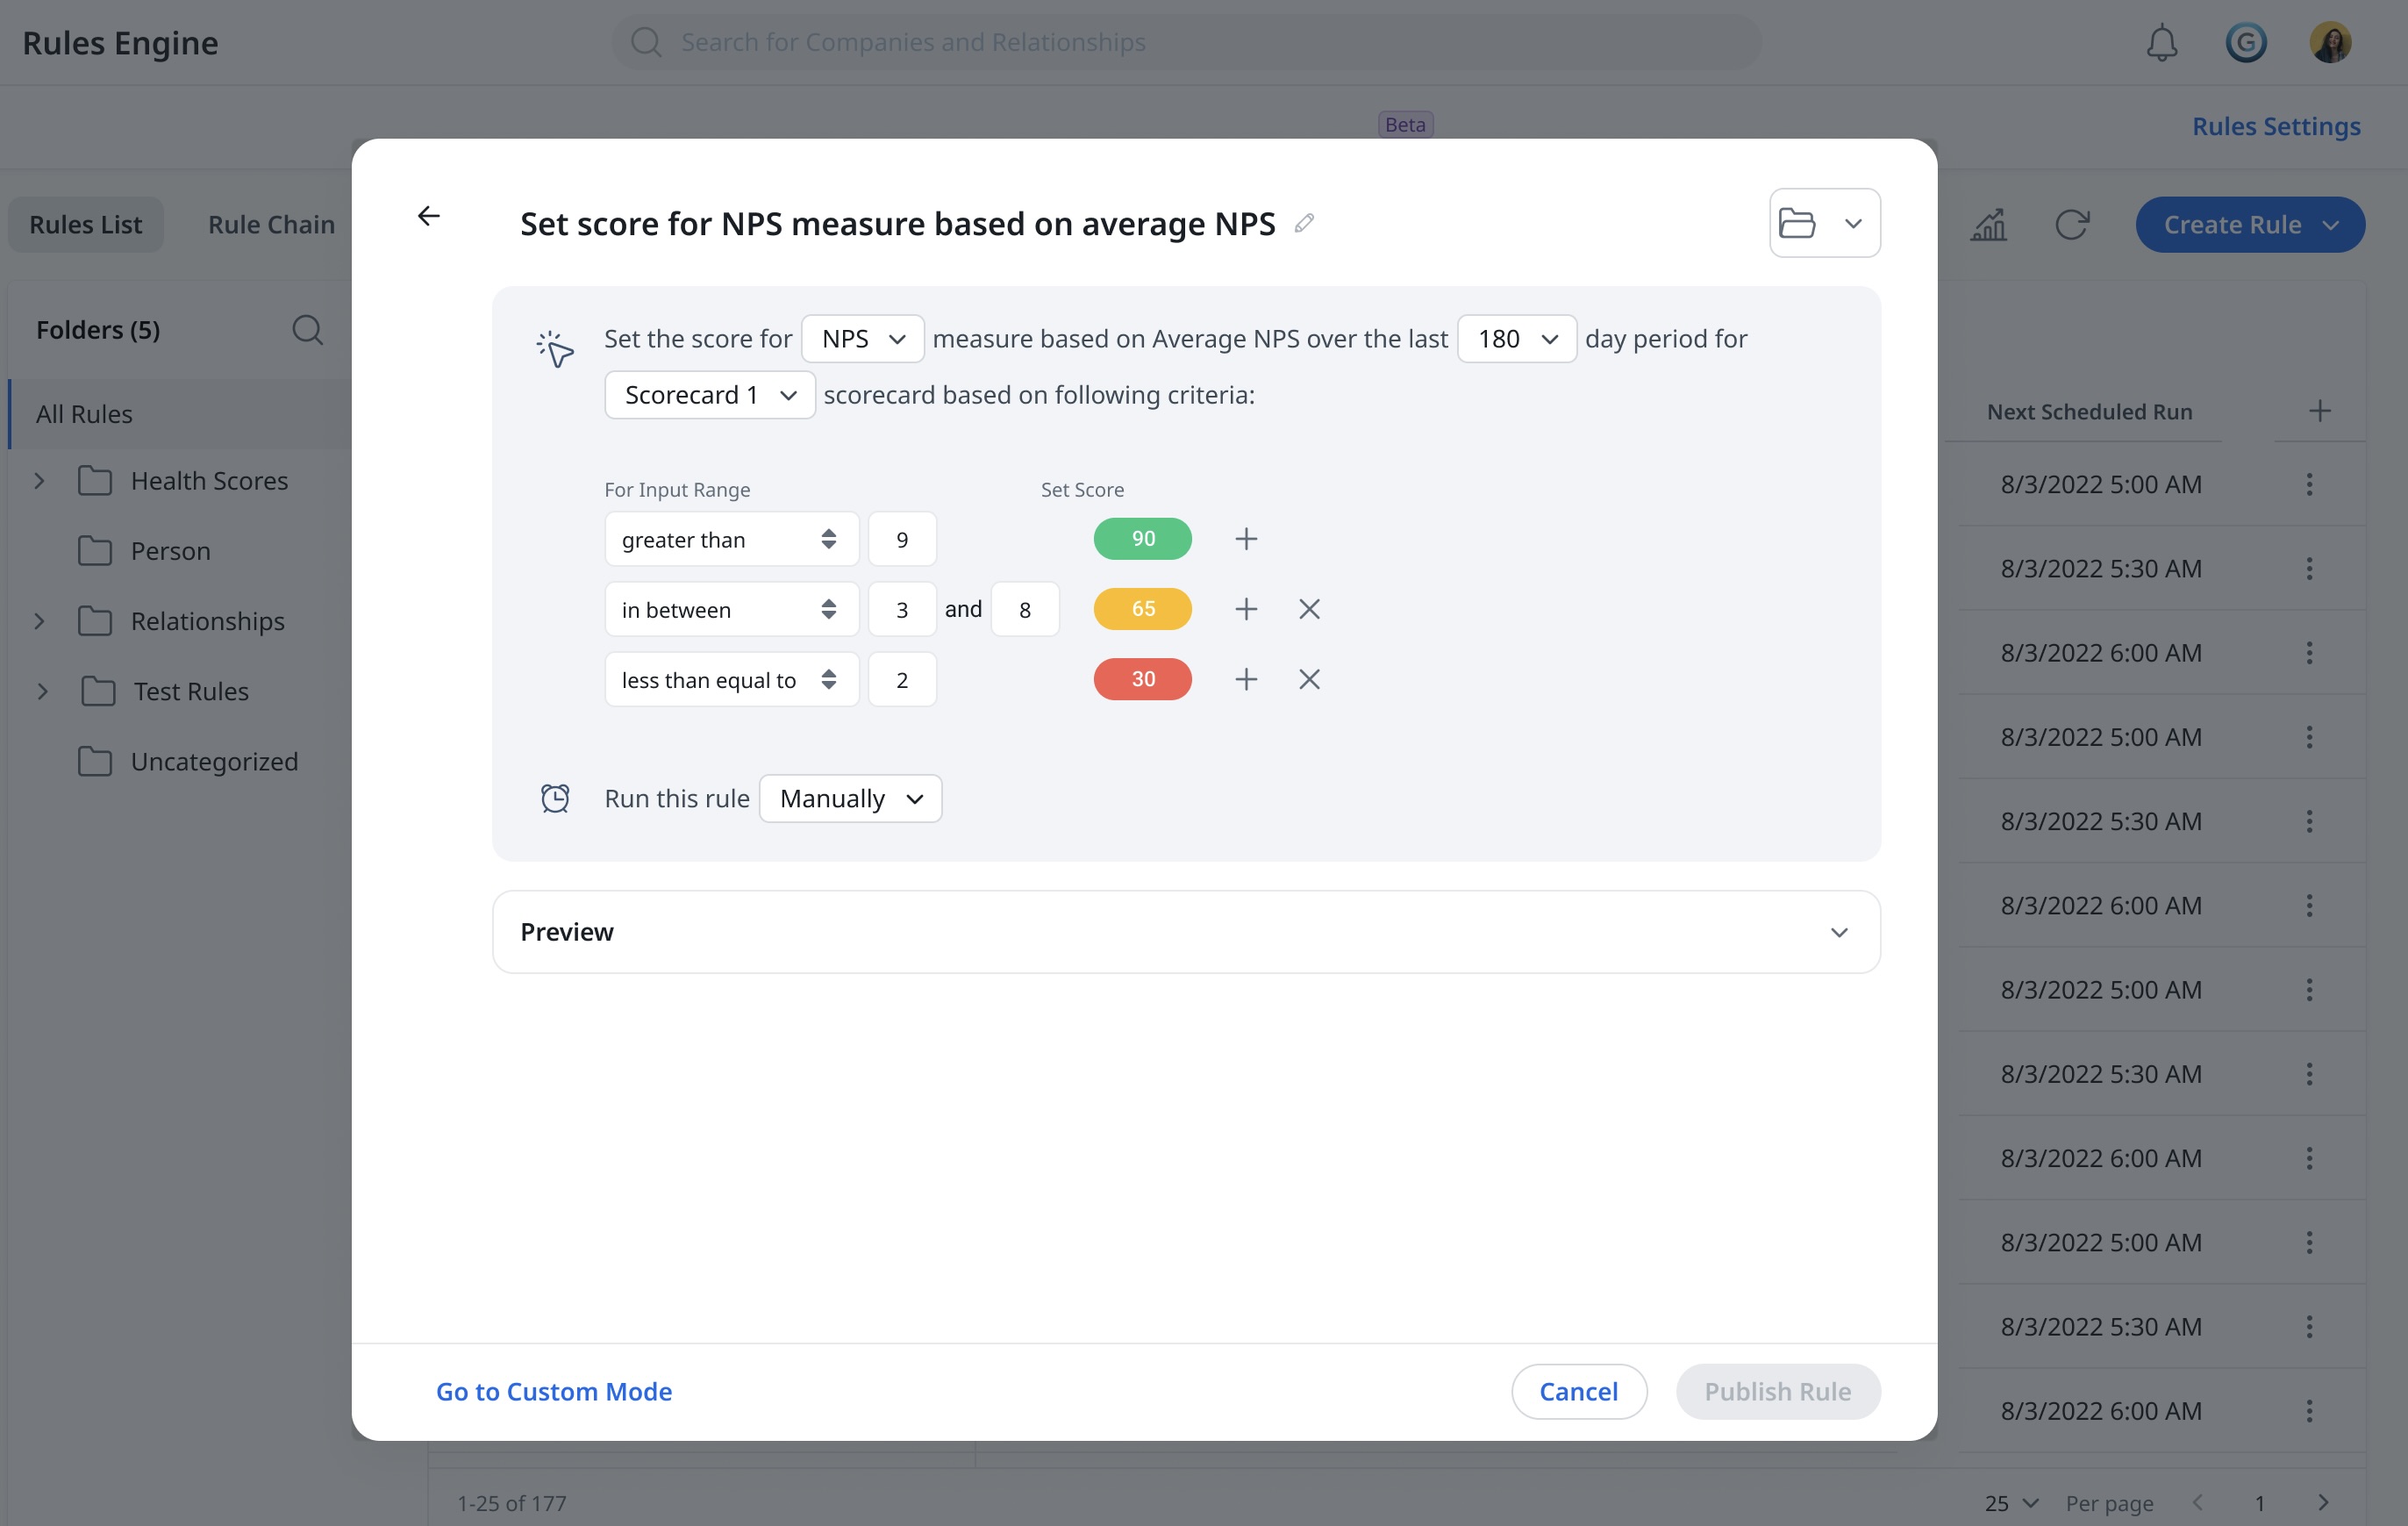 Gainsight rules engine interface configuring scores for Net Promoter Score (NPS) measure based on average NPS, with specified input ranges and set scores.